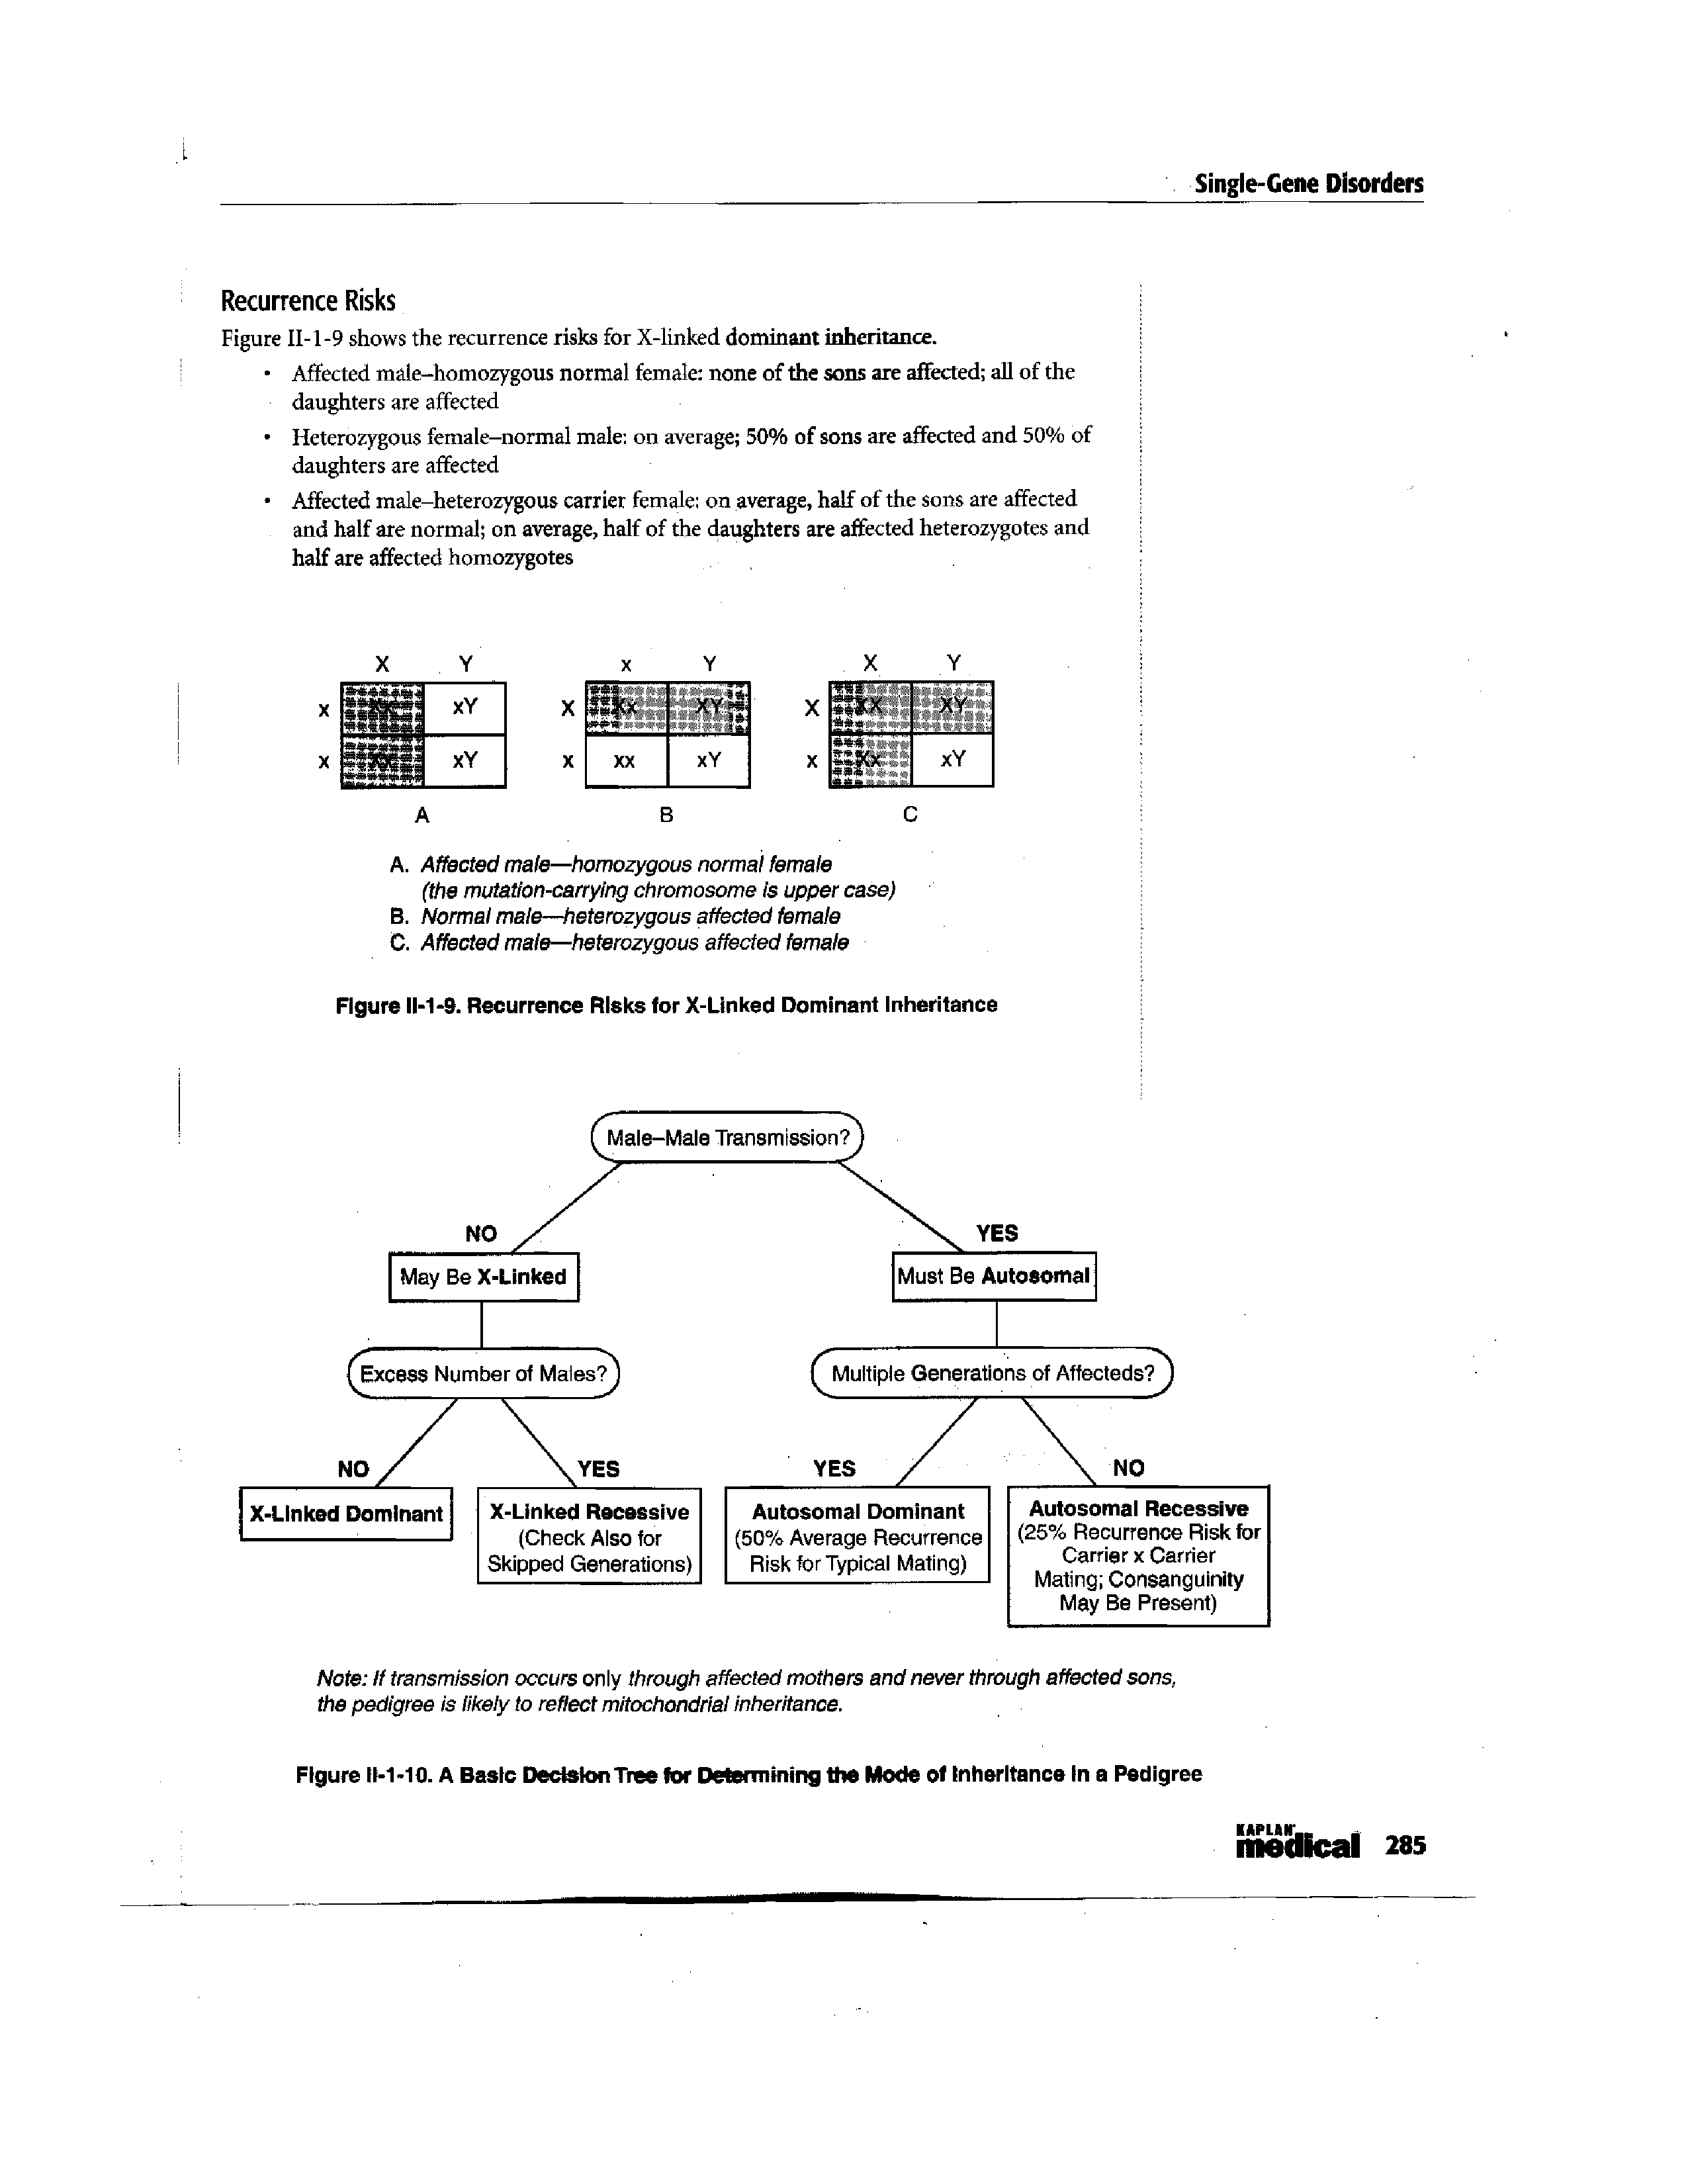 Figure 11-1-10. A Baste Decision Tree for Determining the Mode of inheritance In a Pedigree...